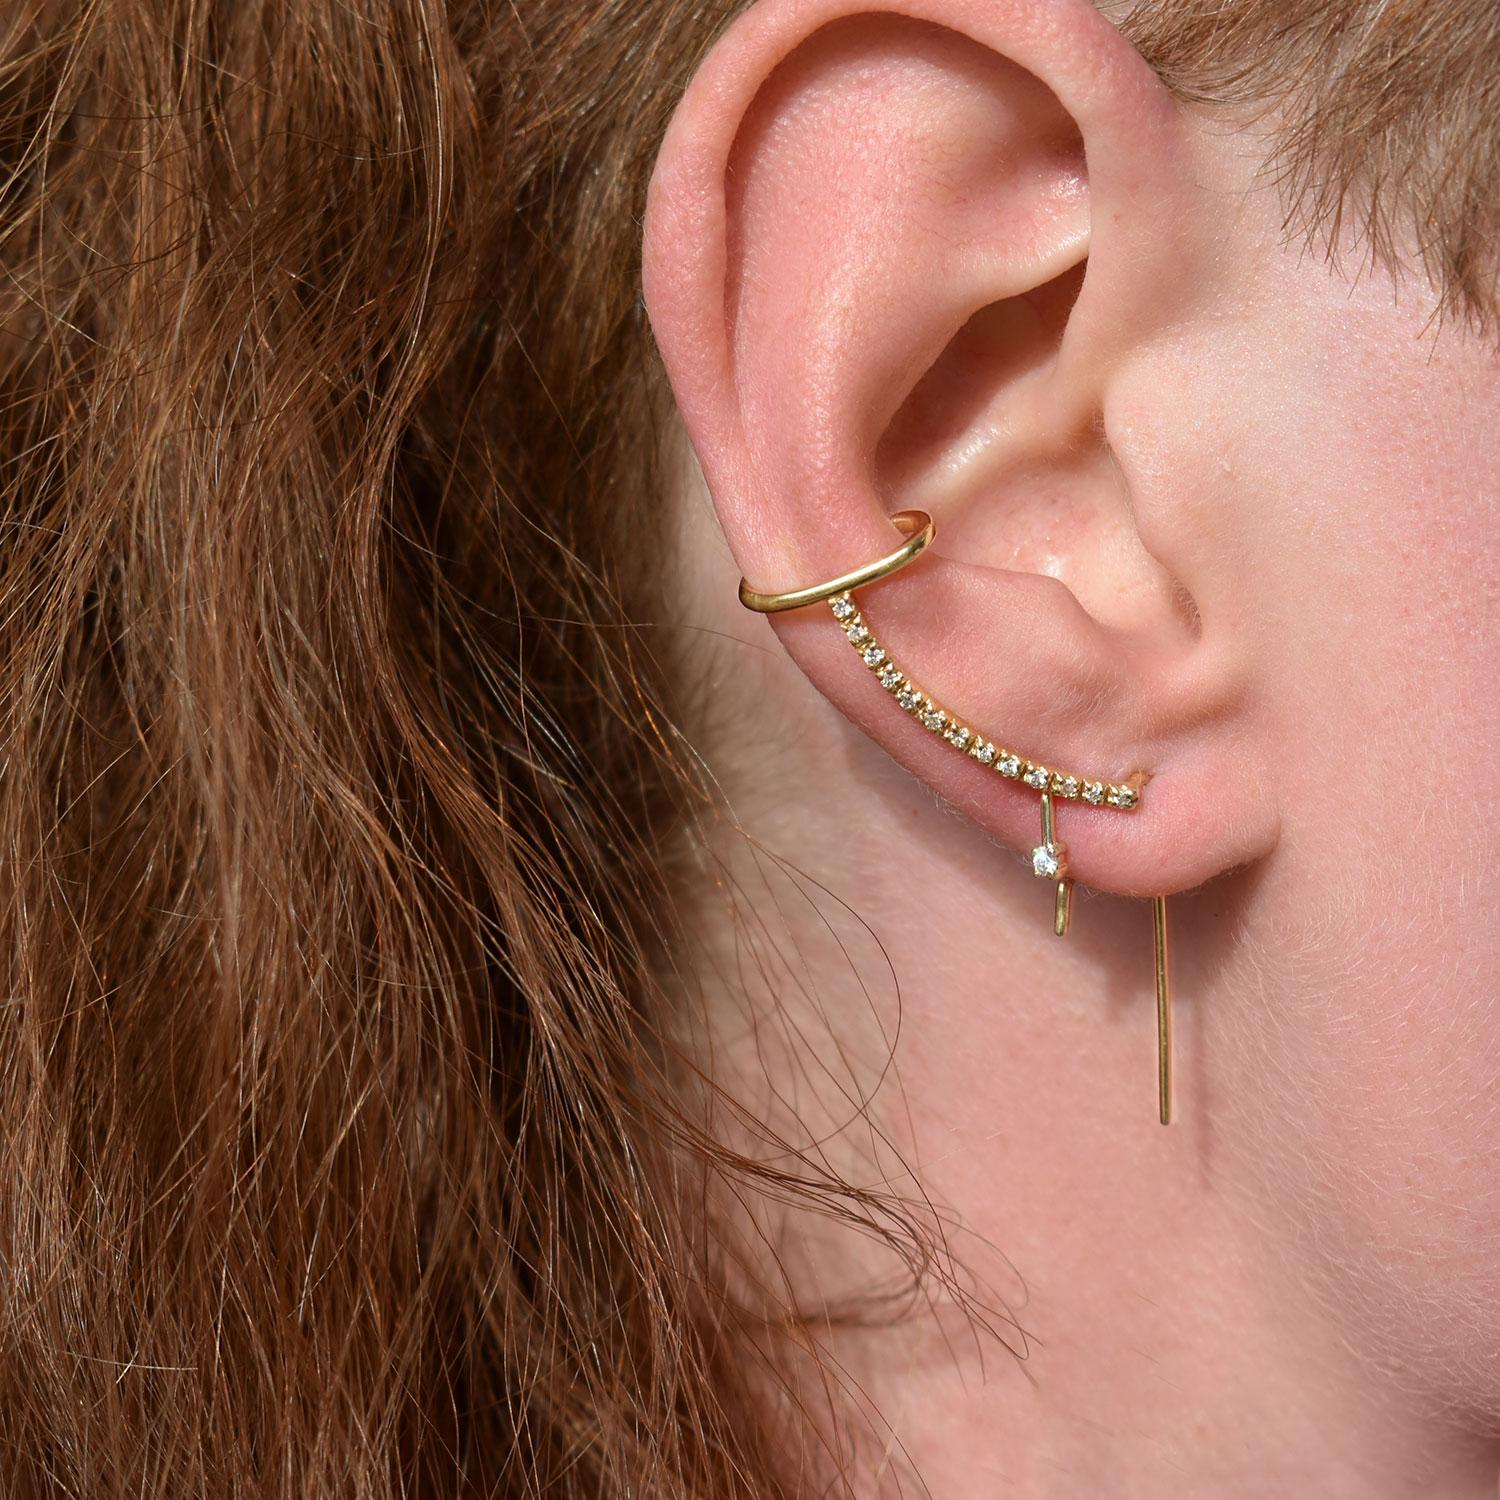 The Pave Diamond Cuff Needle Gold Earring is a statement earring in solid 14k gold featuring an arch of diamonds that reflect the soft sunlight. This style earring fallows the outline of the ear and ends with a comfortable cuff.

How to wear it: